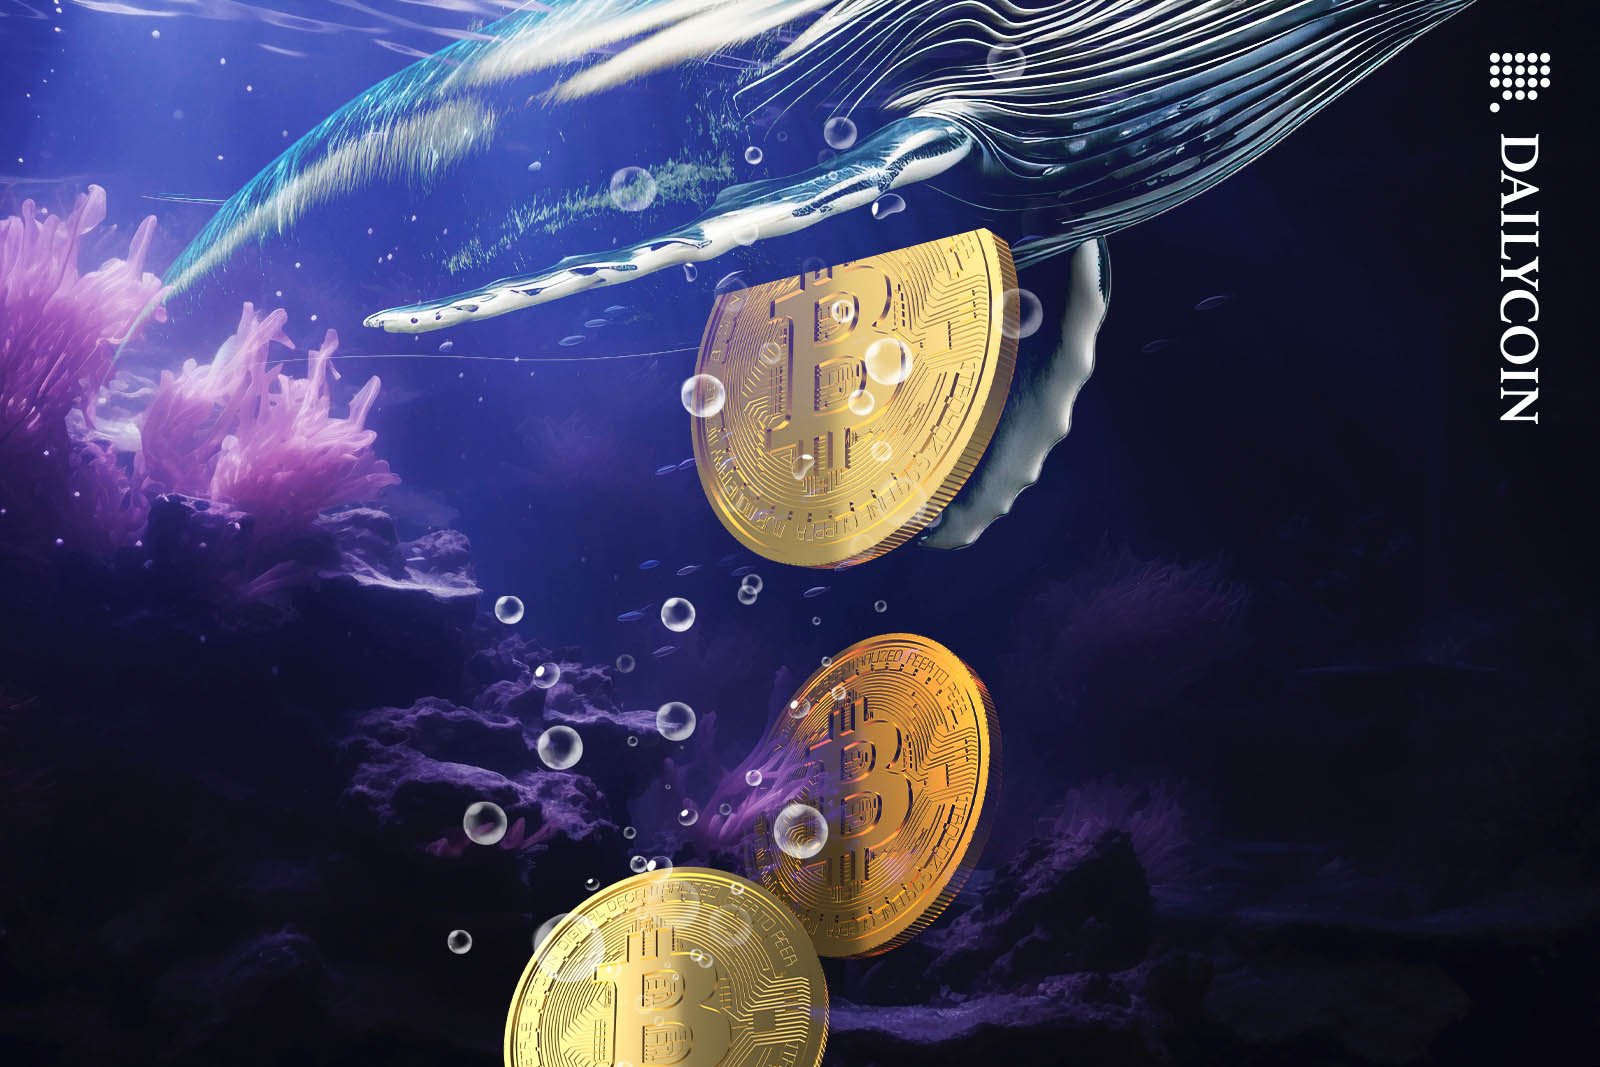 Whale off-loading Bitcoins under the sea.